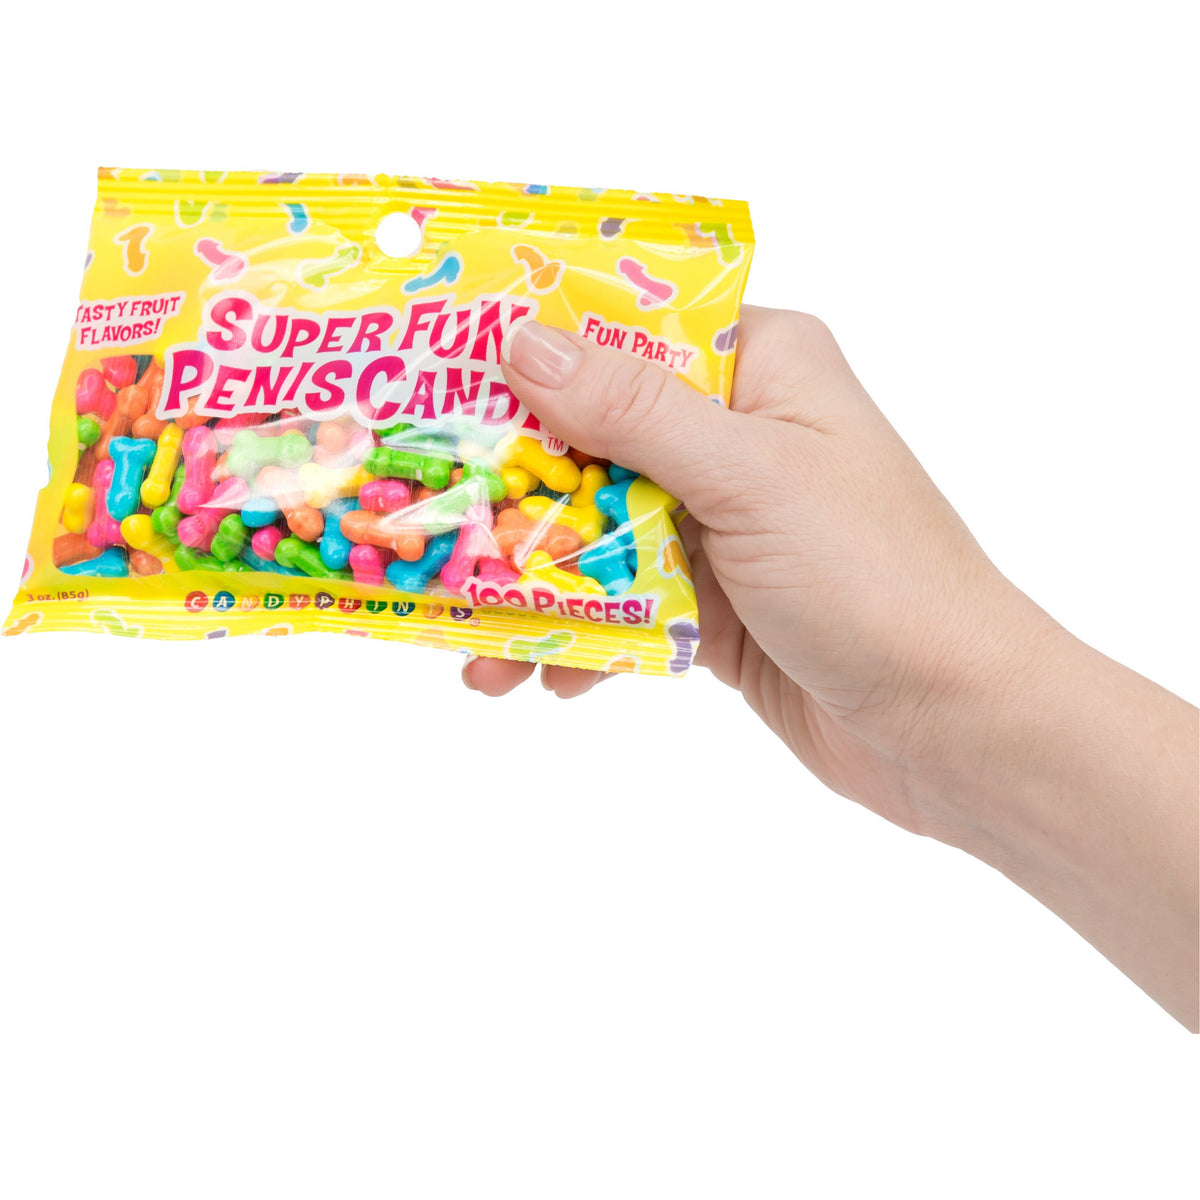 Candyprints Candy Pouch - Penis Shaped Rainbow Candy